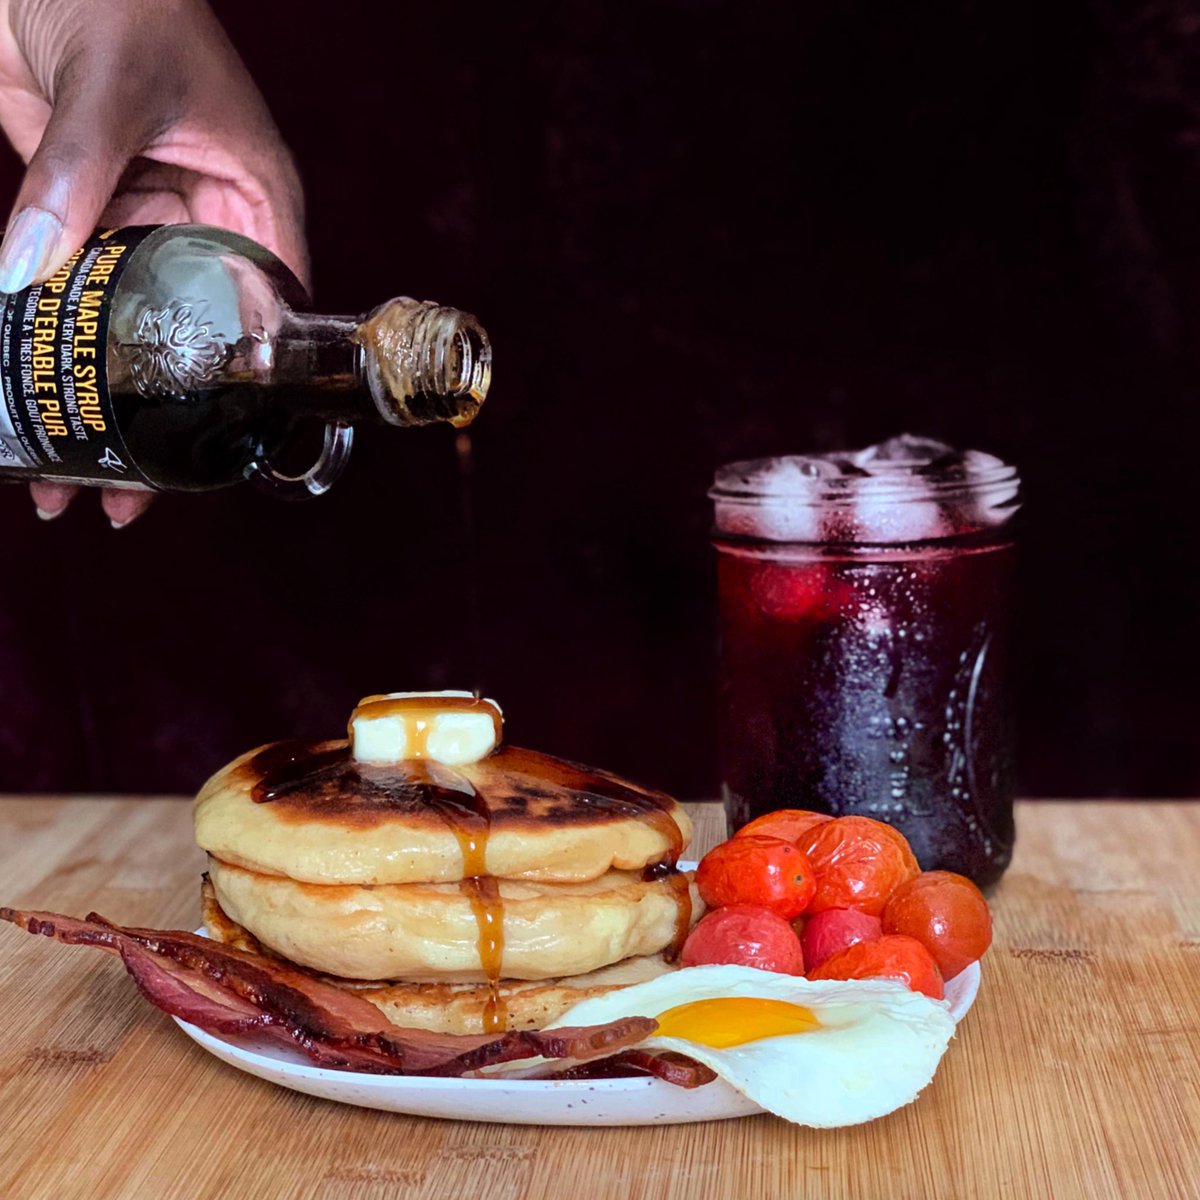 I’ve fallen into the lovely habit of starting my week with a lil’ brunch, prepped between morning meetings and calls.•cinnamon vanilla pancakes•double smoked bacon•bacon fat roasted tomatoes •fried egghibiscus iced tea with cucumber simple in the glass  #humblebragdiet